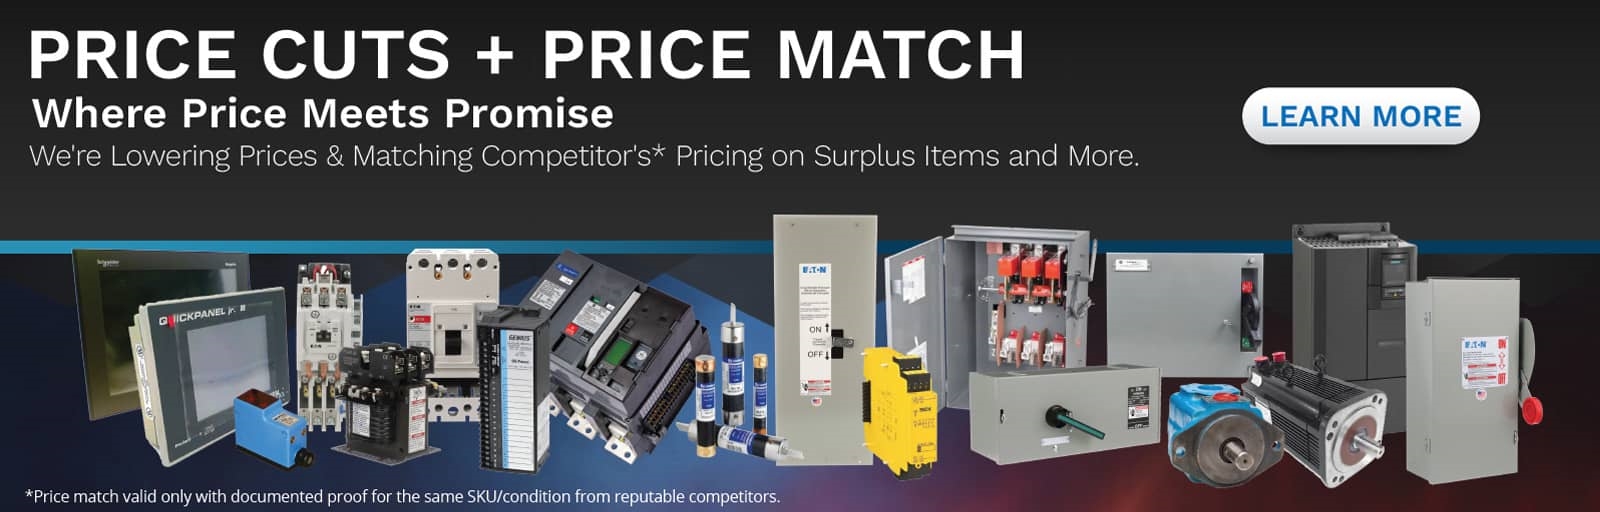 PRICE CUTS + PRICE MATCH - Where Price Meets Promise